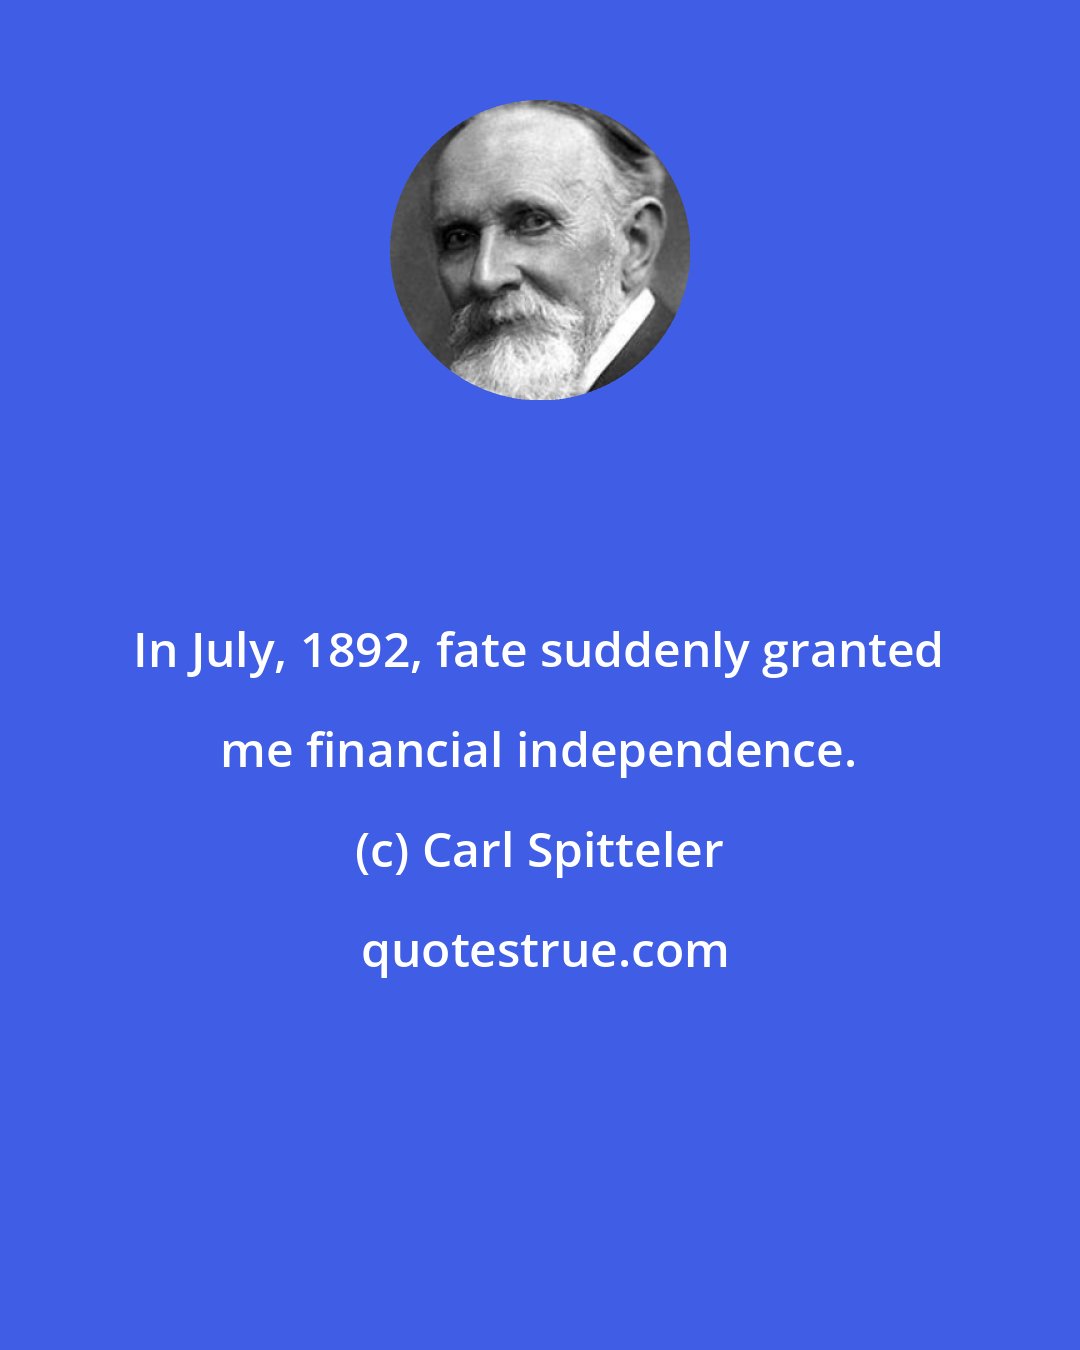 Carl Spitteler: In July, 1892, fate suddenly granted me financial independence.